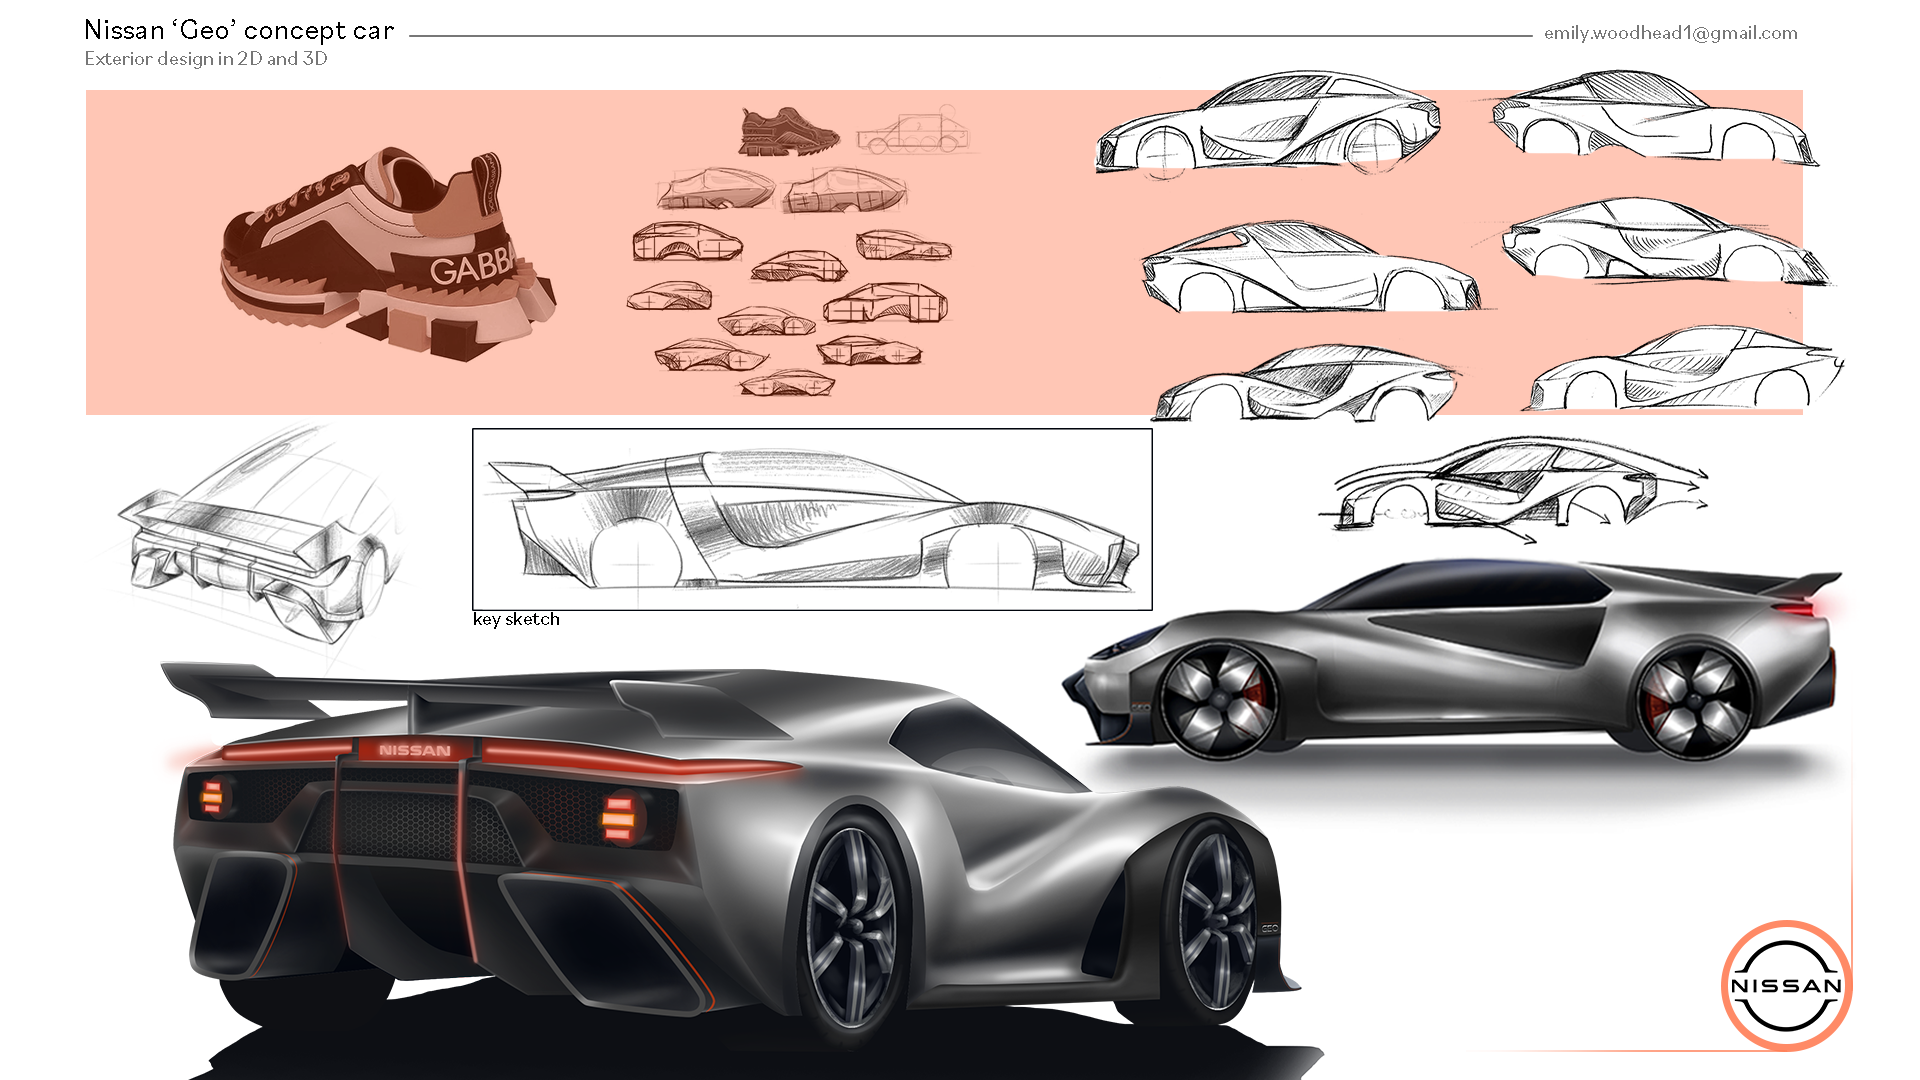 BA Visual effects work by Emily Woodhead, showing a page of sketches and high-detail drawings of the supercar design. The layout demonstrates a snippet of my design process.